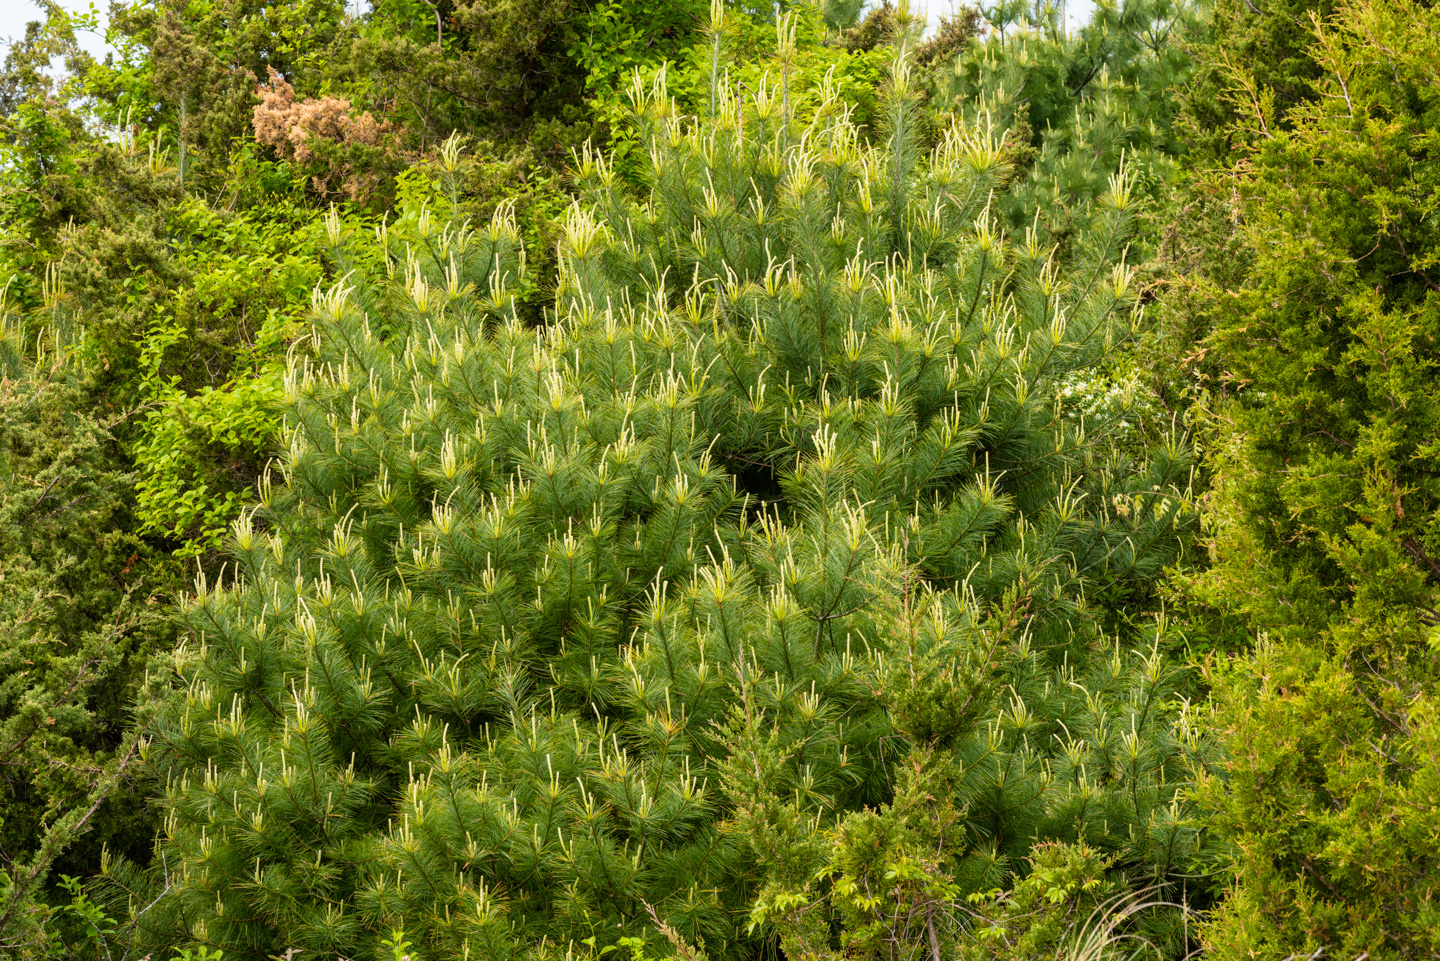 An evergreen tree with a lot of new growth evident.